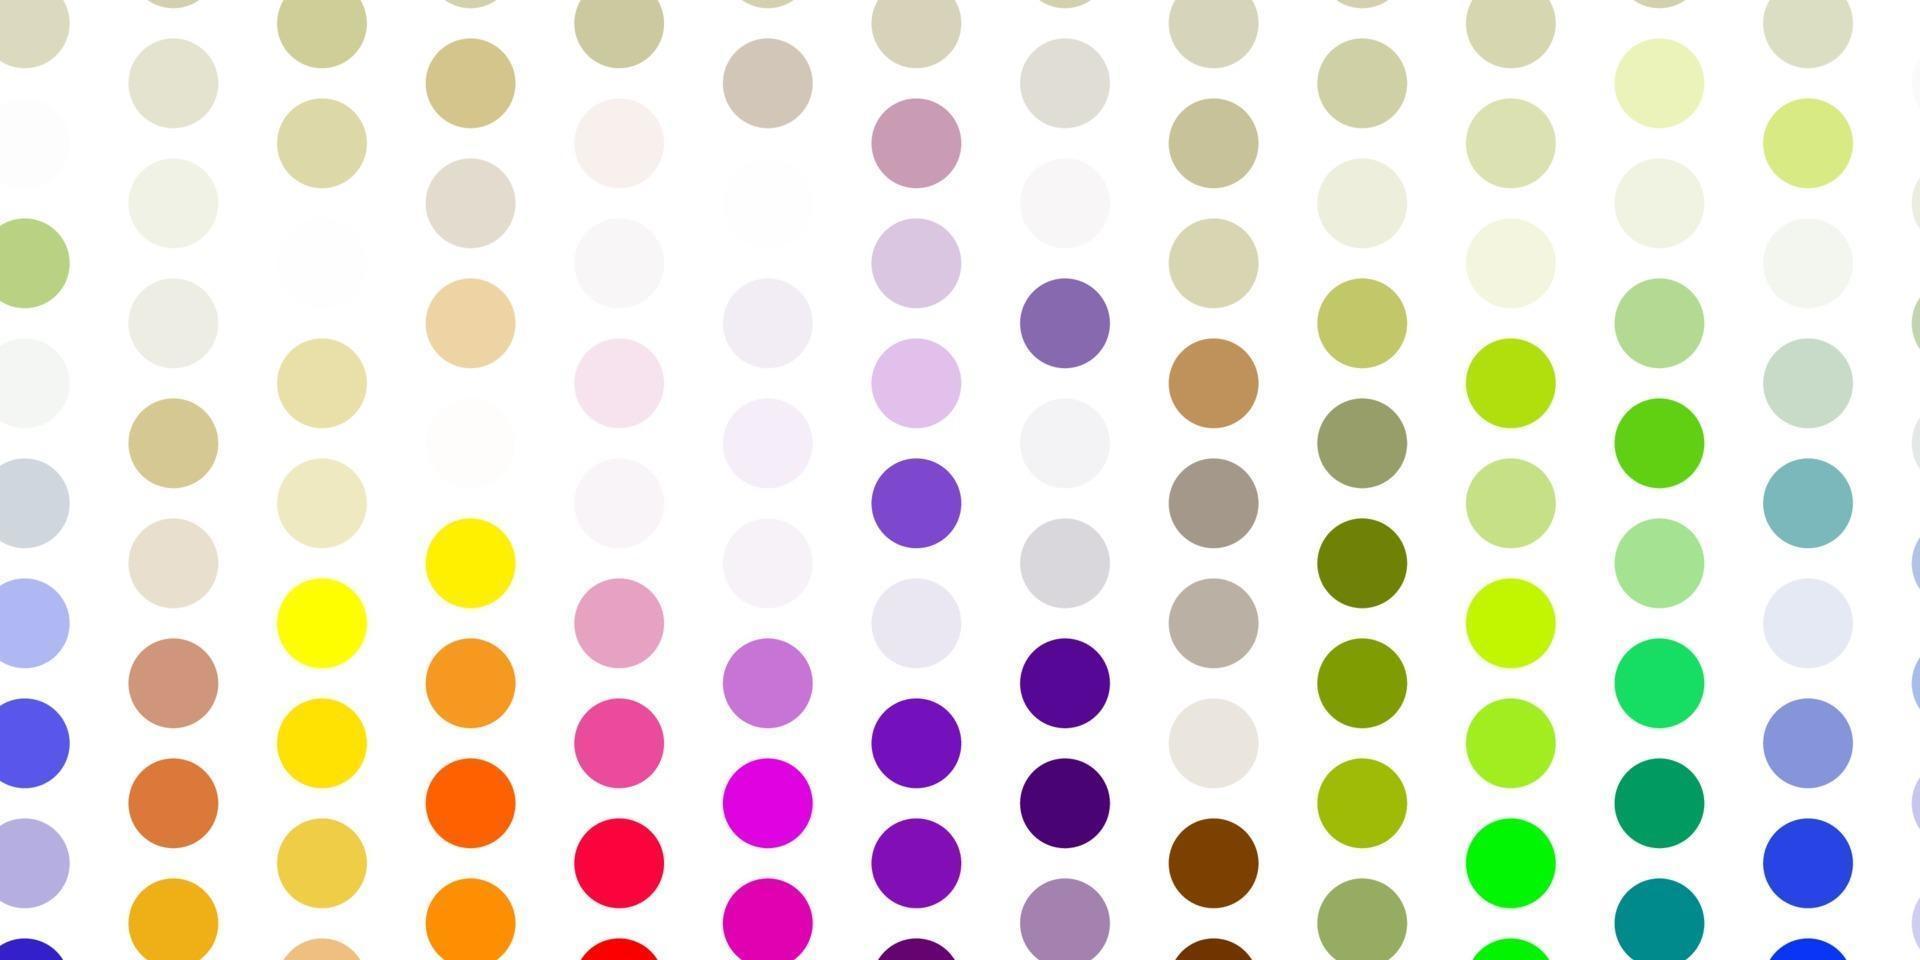 Light multicolor vector pattern with spheres.